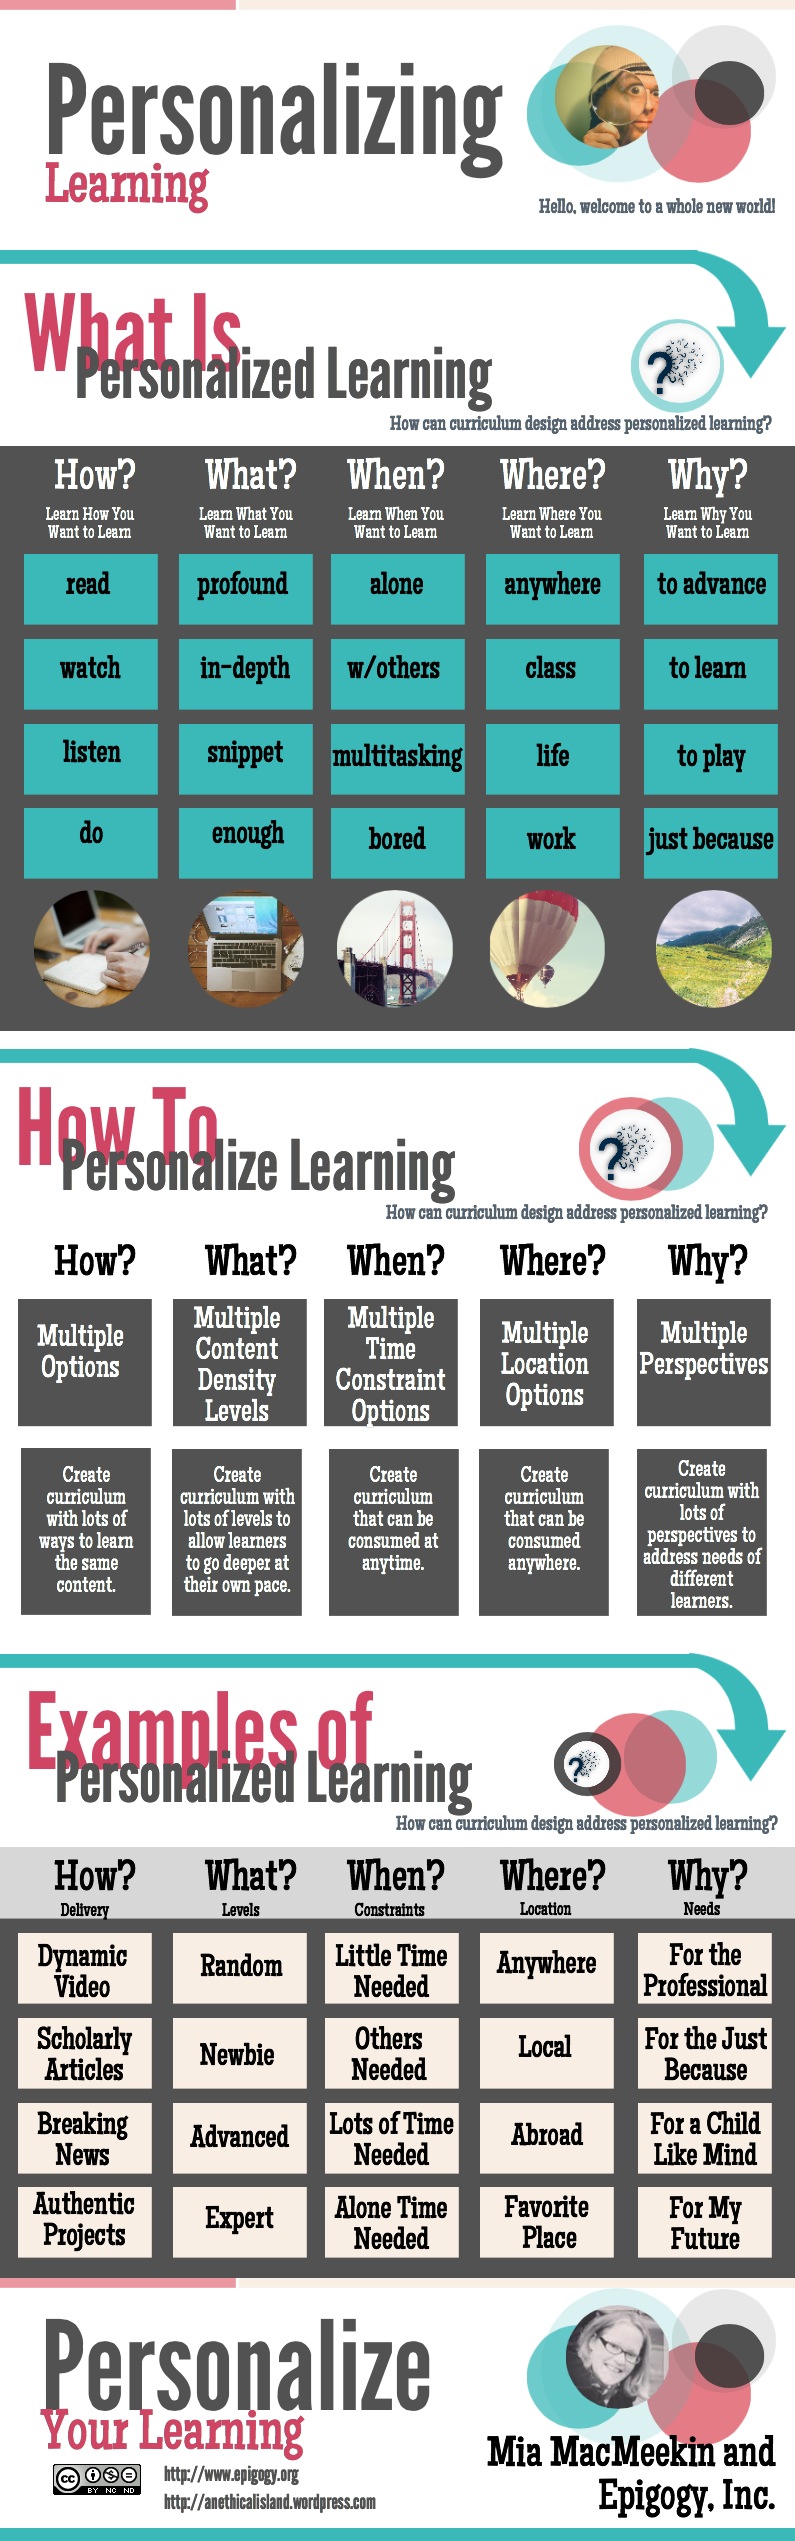 Personalized Learning Visually Explained for Teachers
        ~ 
        Educational Technology and Mobile Learning